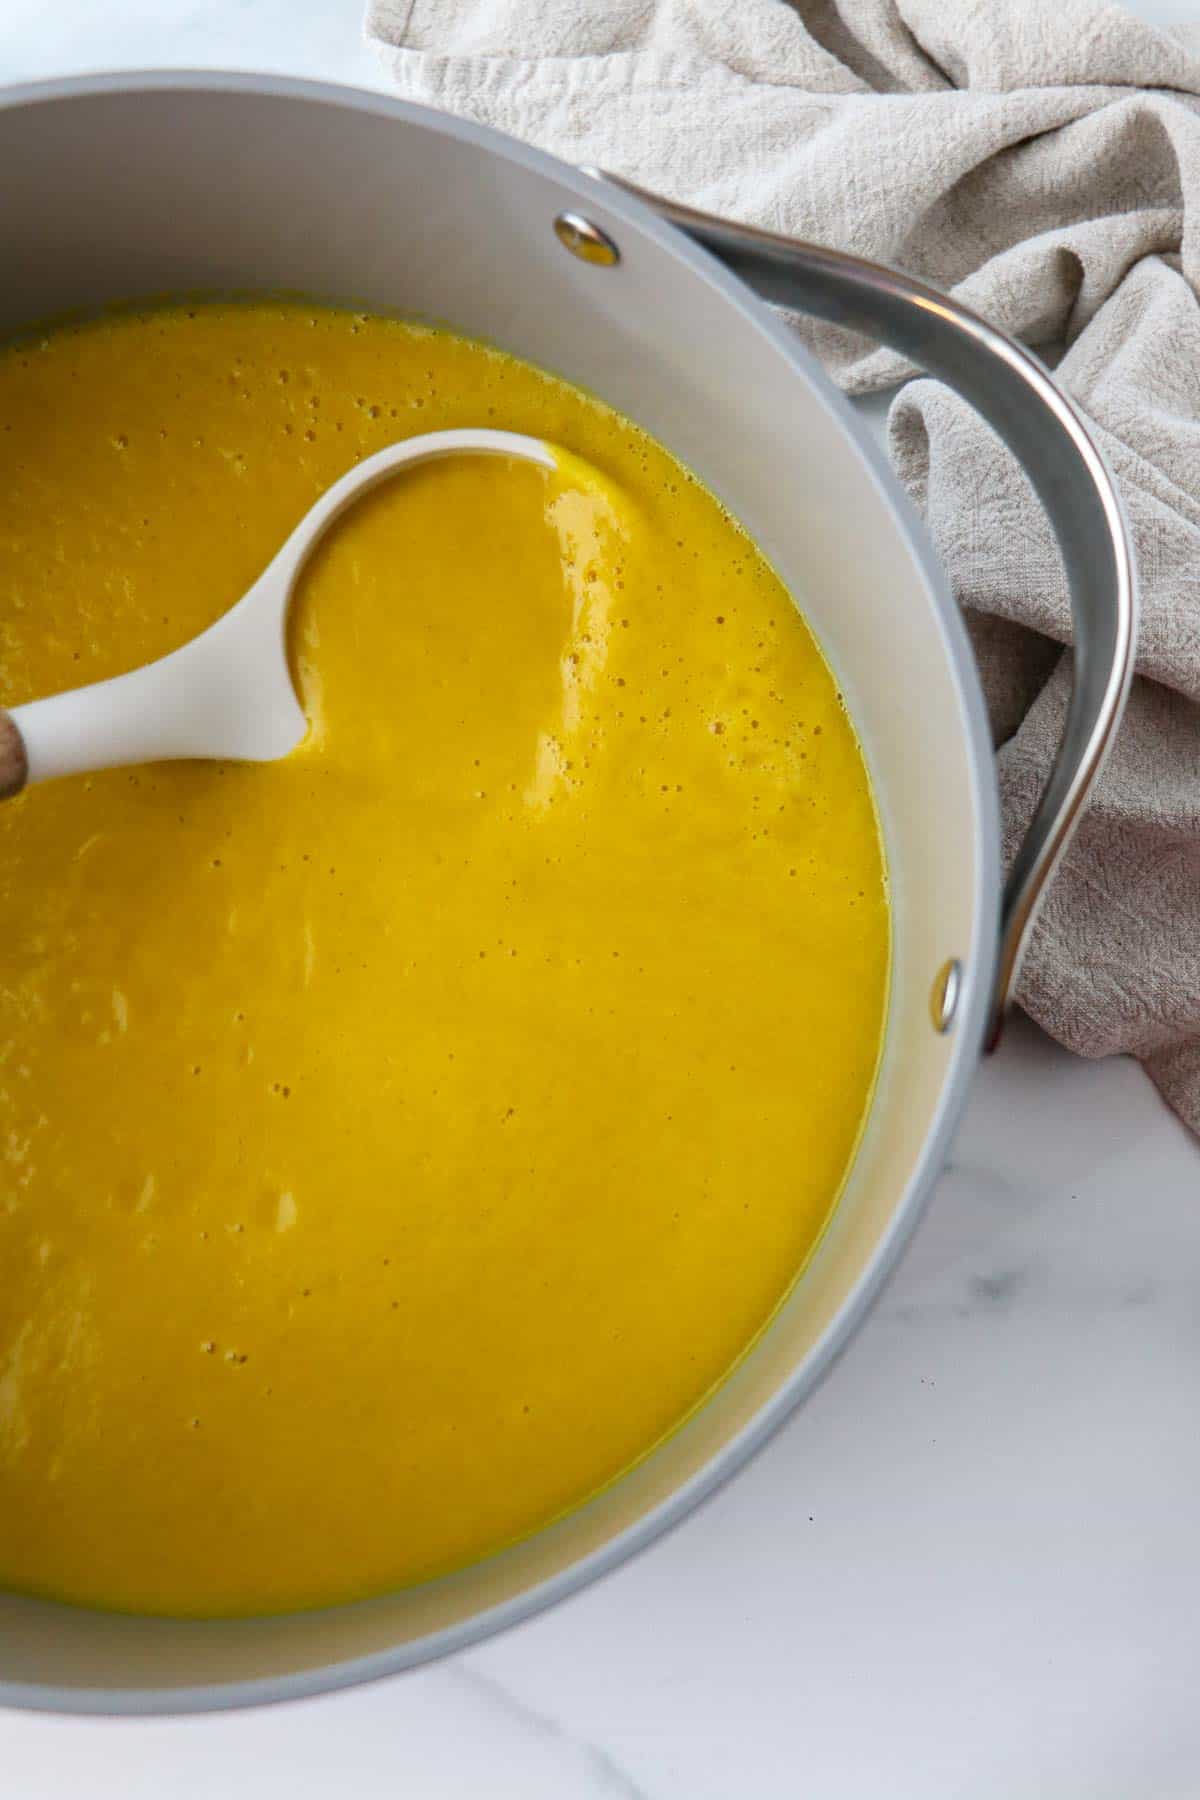 Pot of Golden Beet Soup with a white ladle.